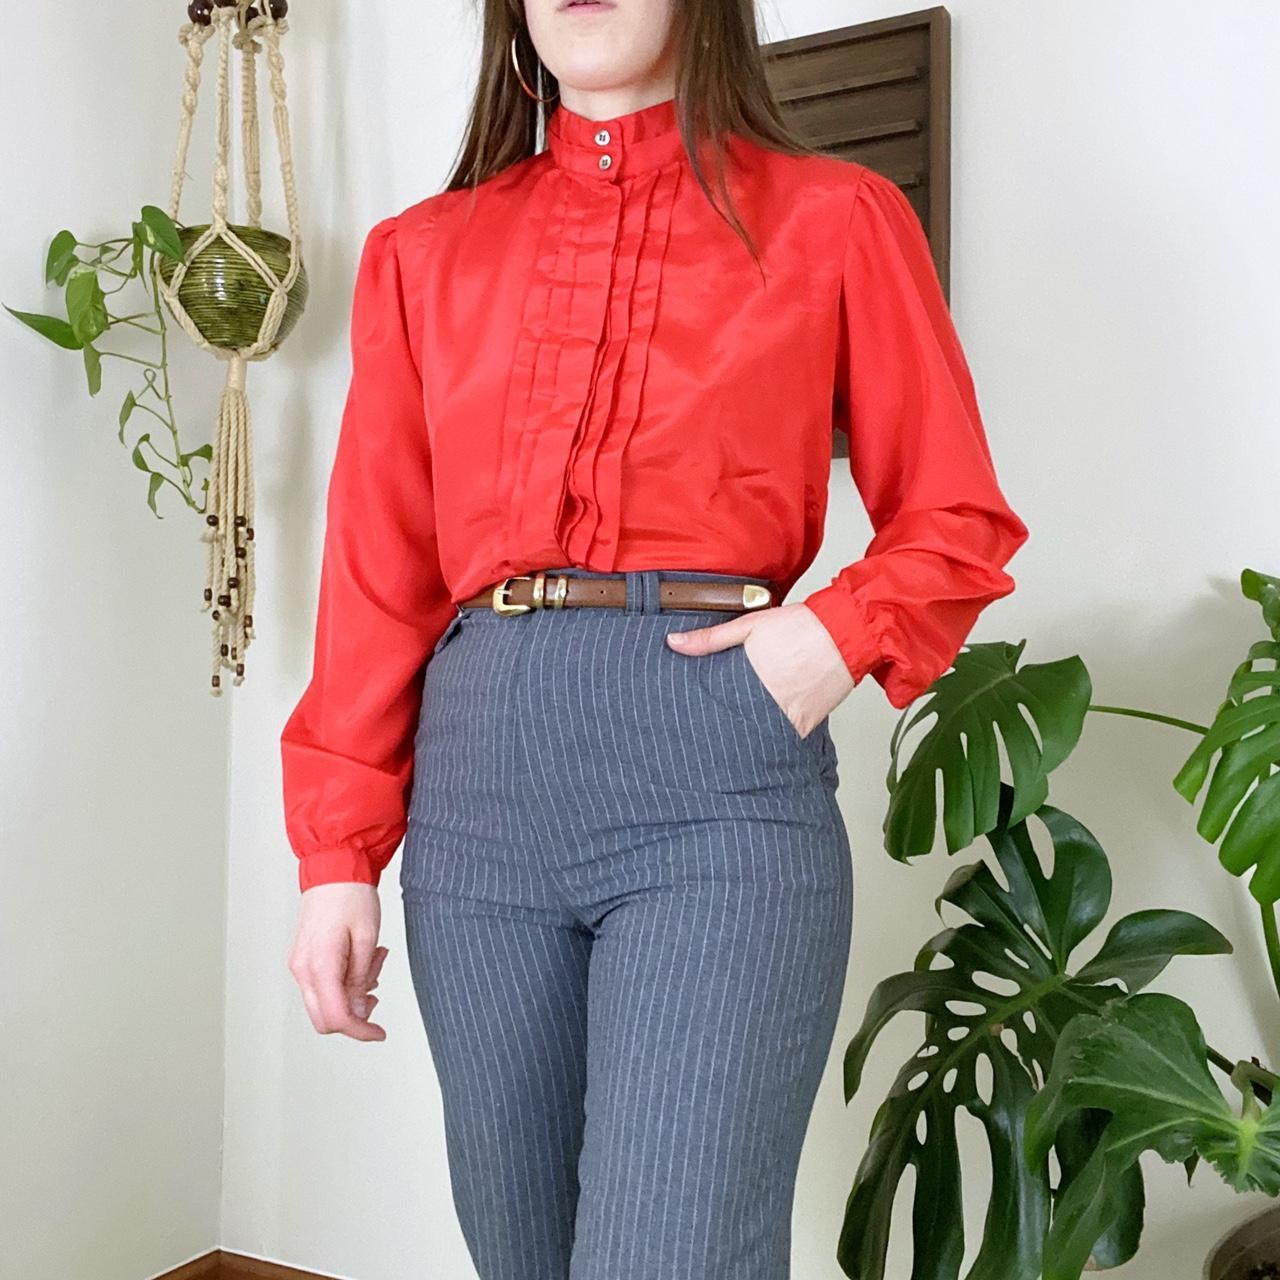 Evan Picone Women's Red Blouse